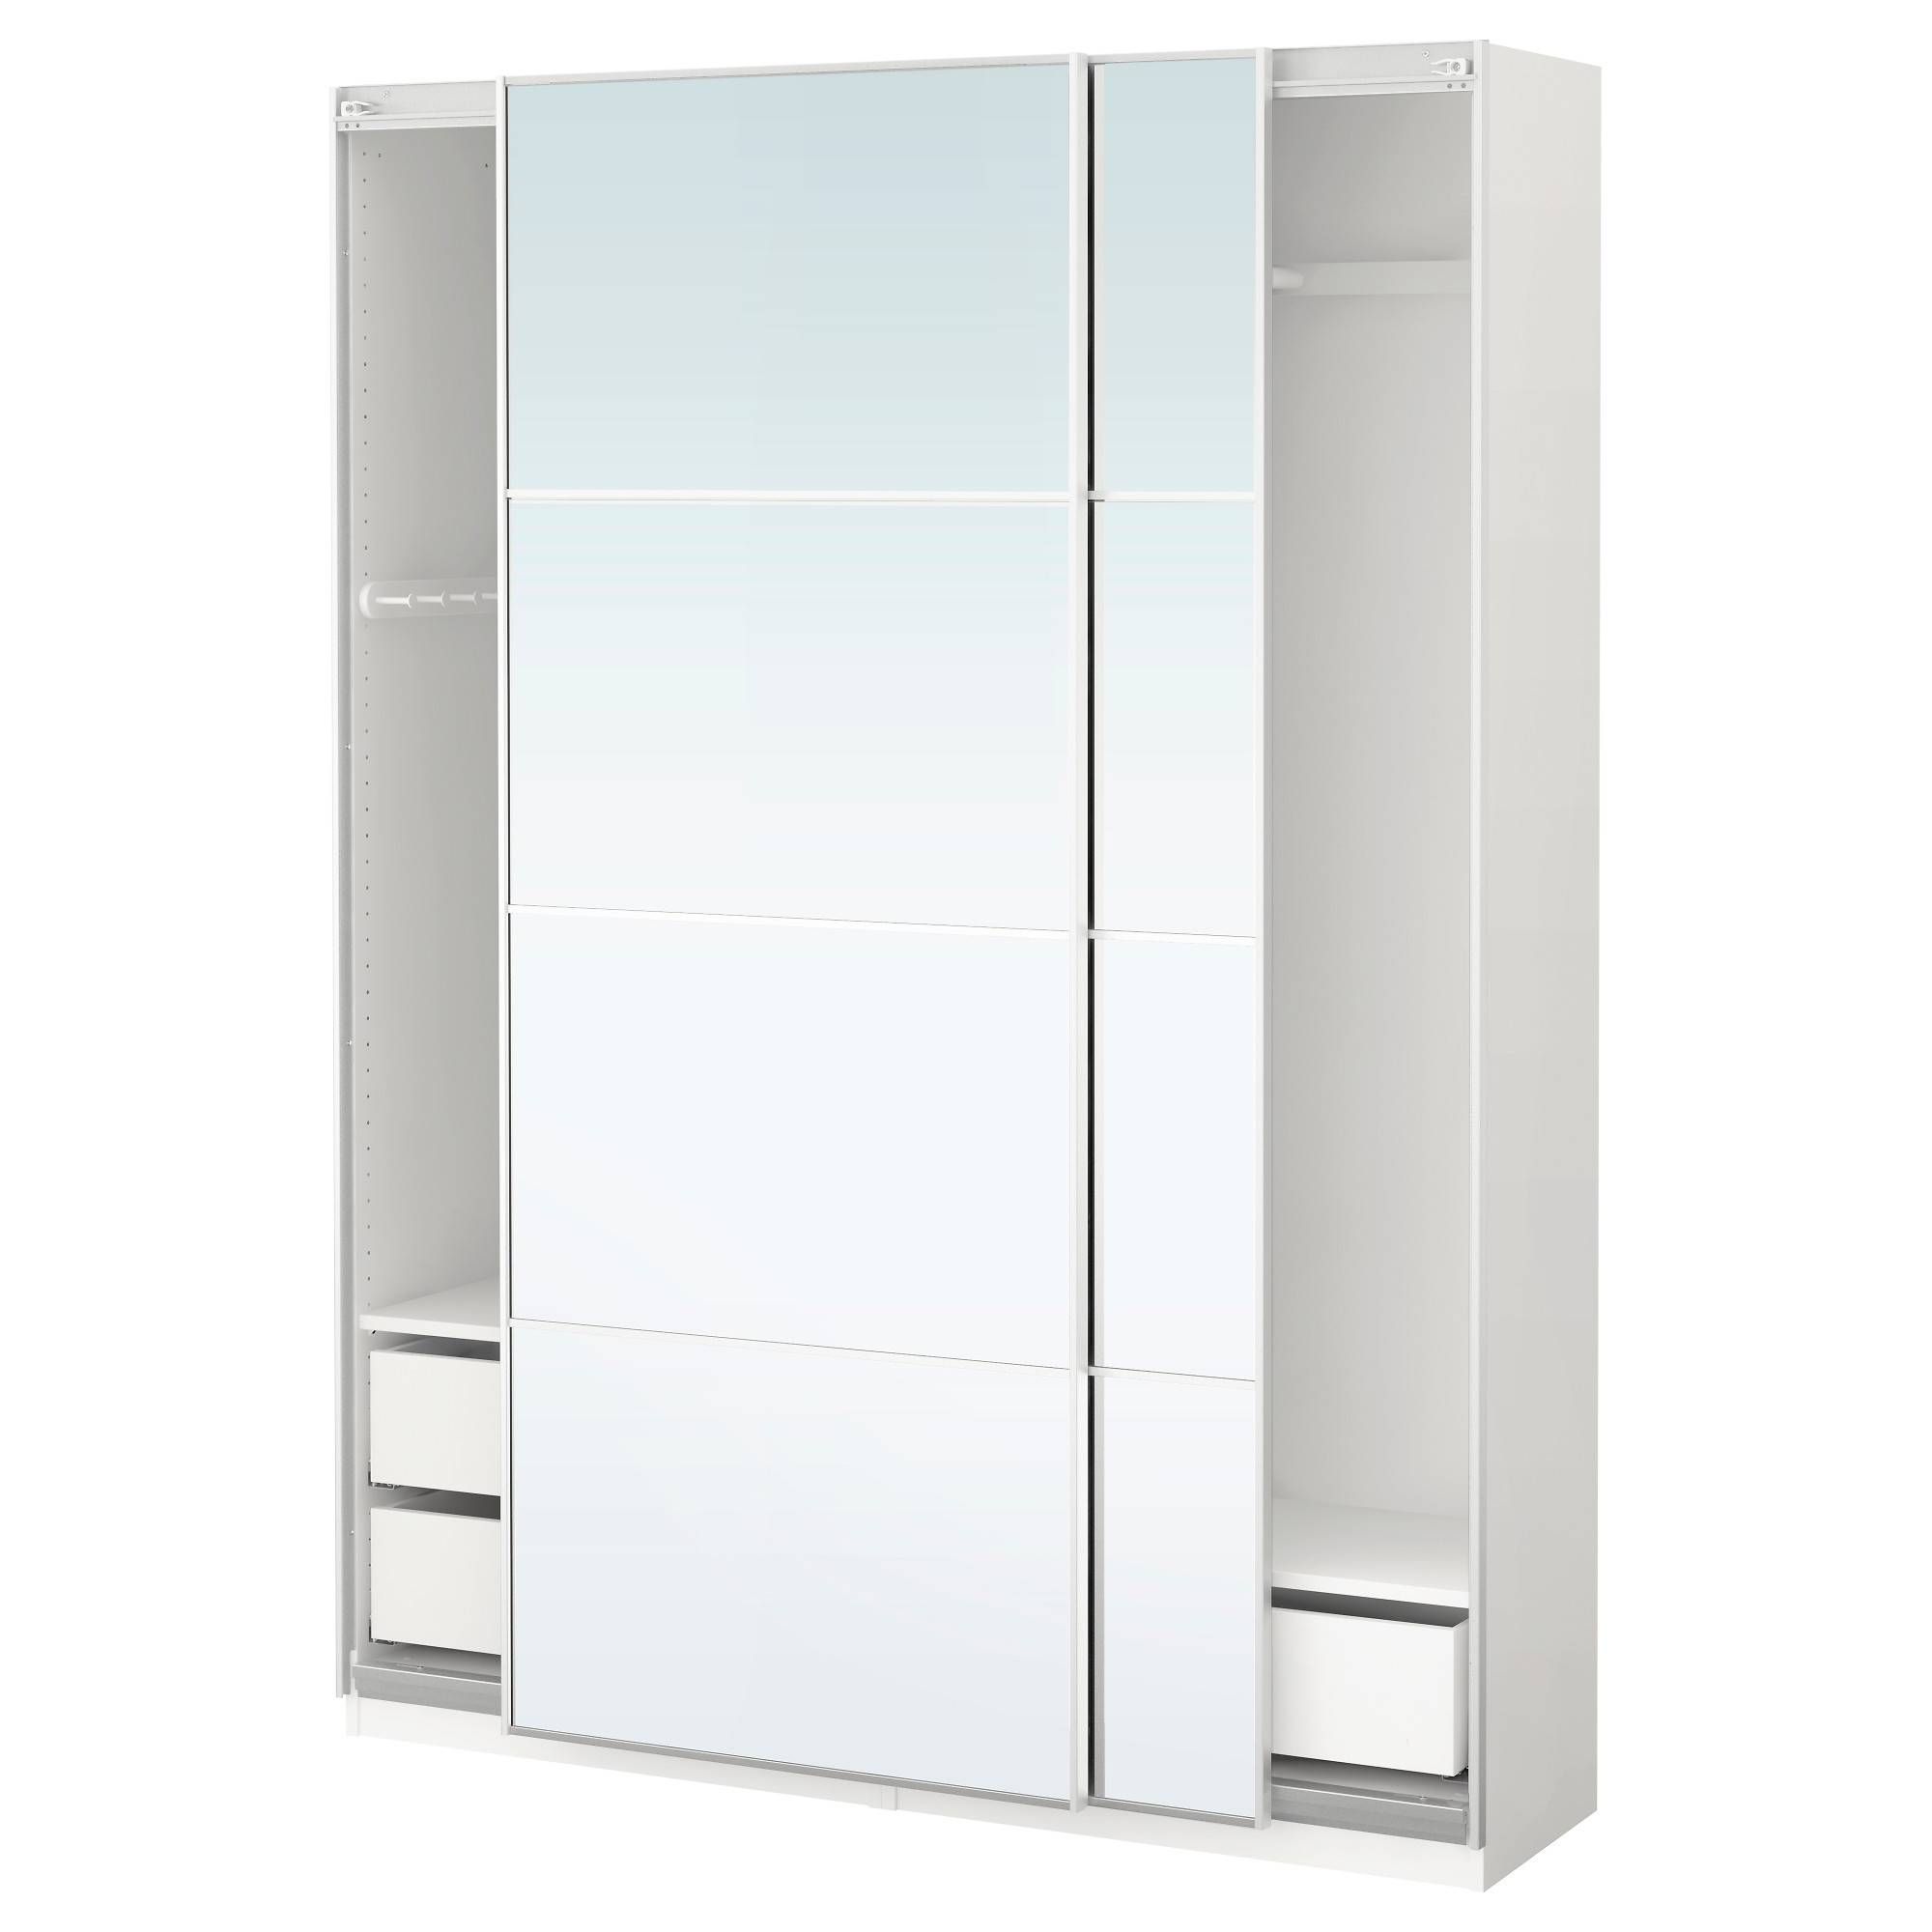 Wardrobes, Armoires & Closets – Ikea With Regard To Cheap Wardrobes With Mirrors (View 5 of 15)